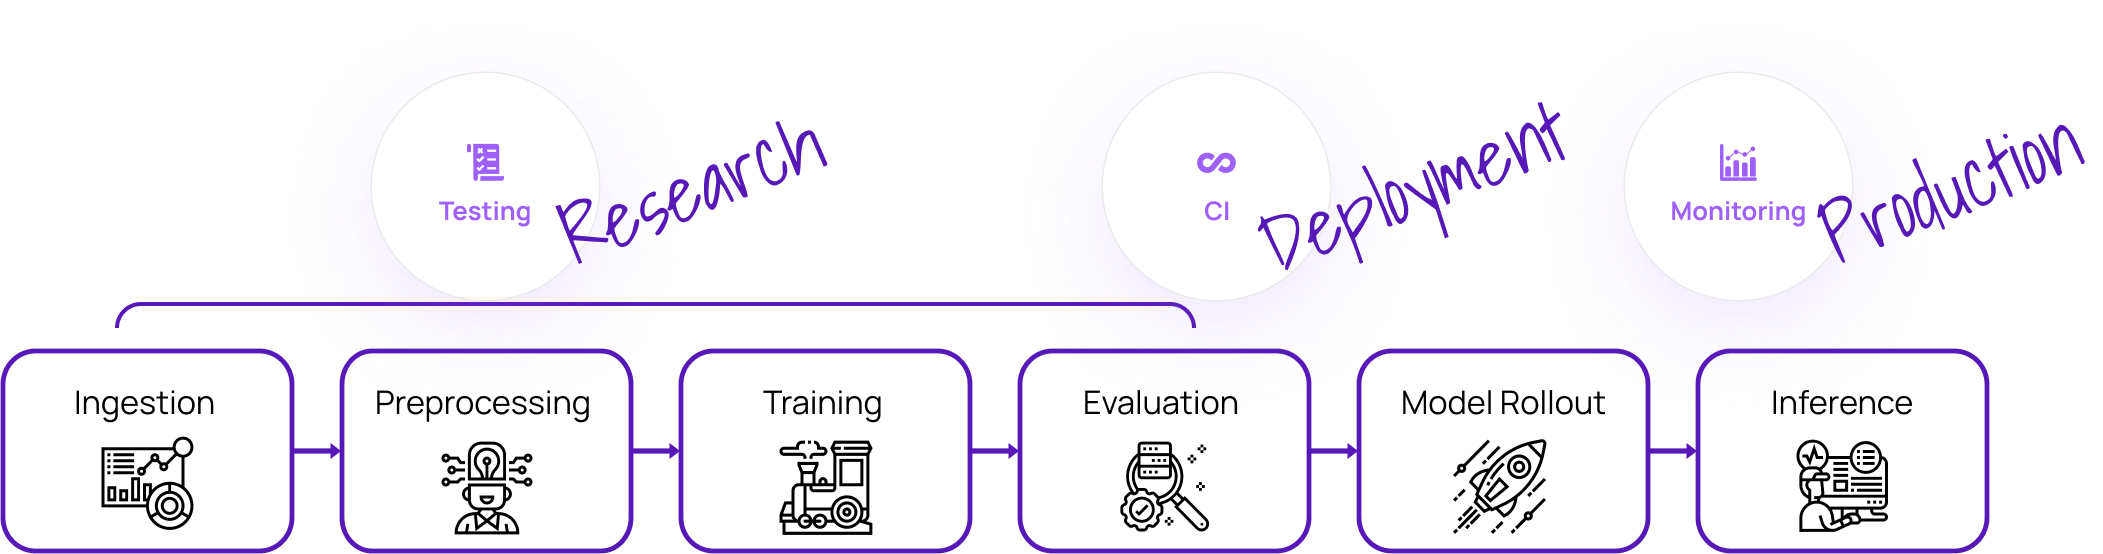 Phases for Continuous Validation of ML Models and Data